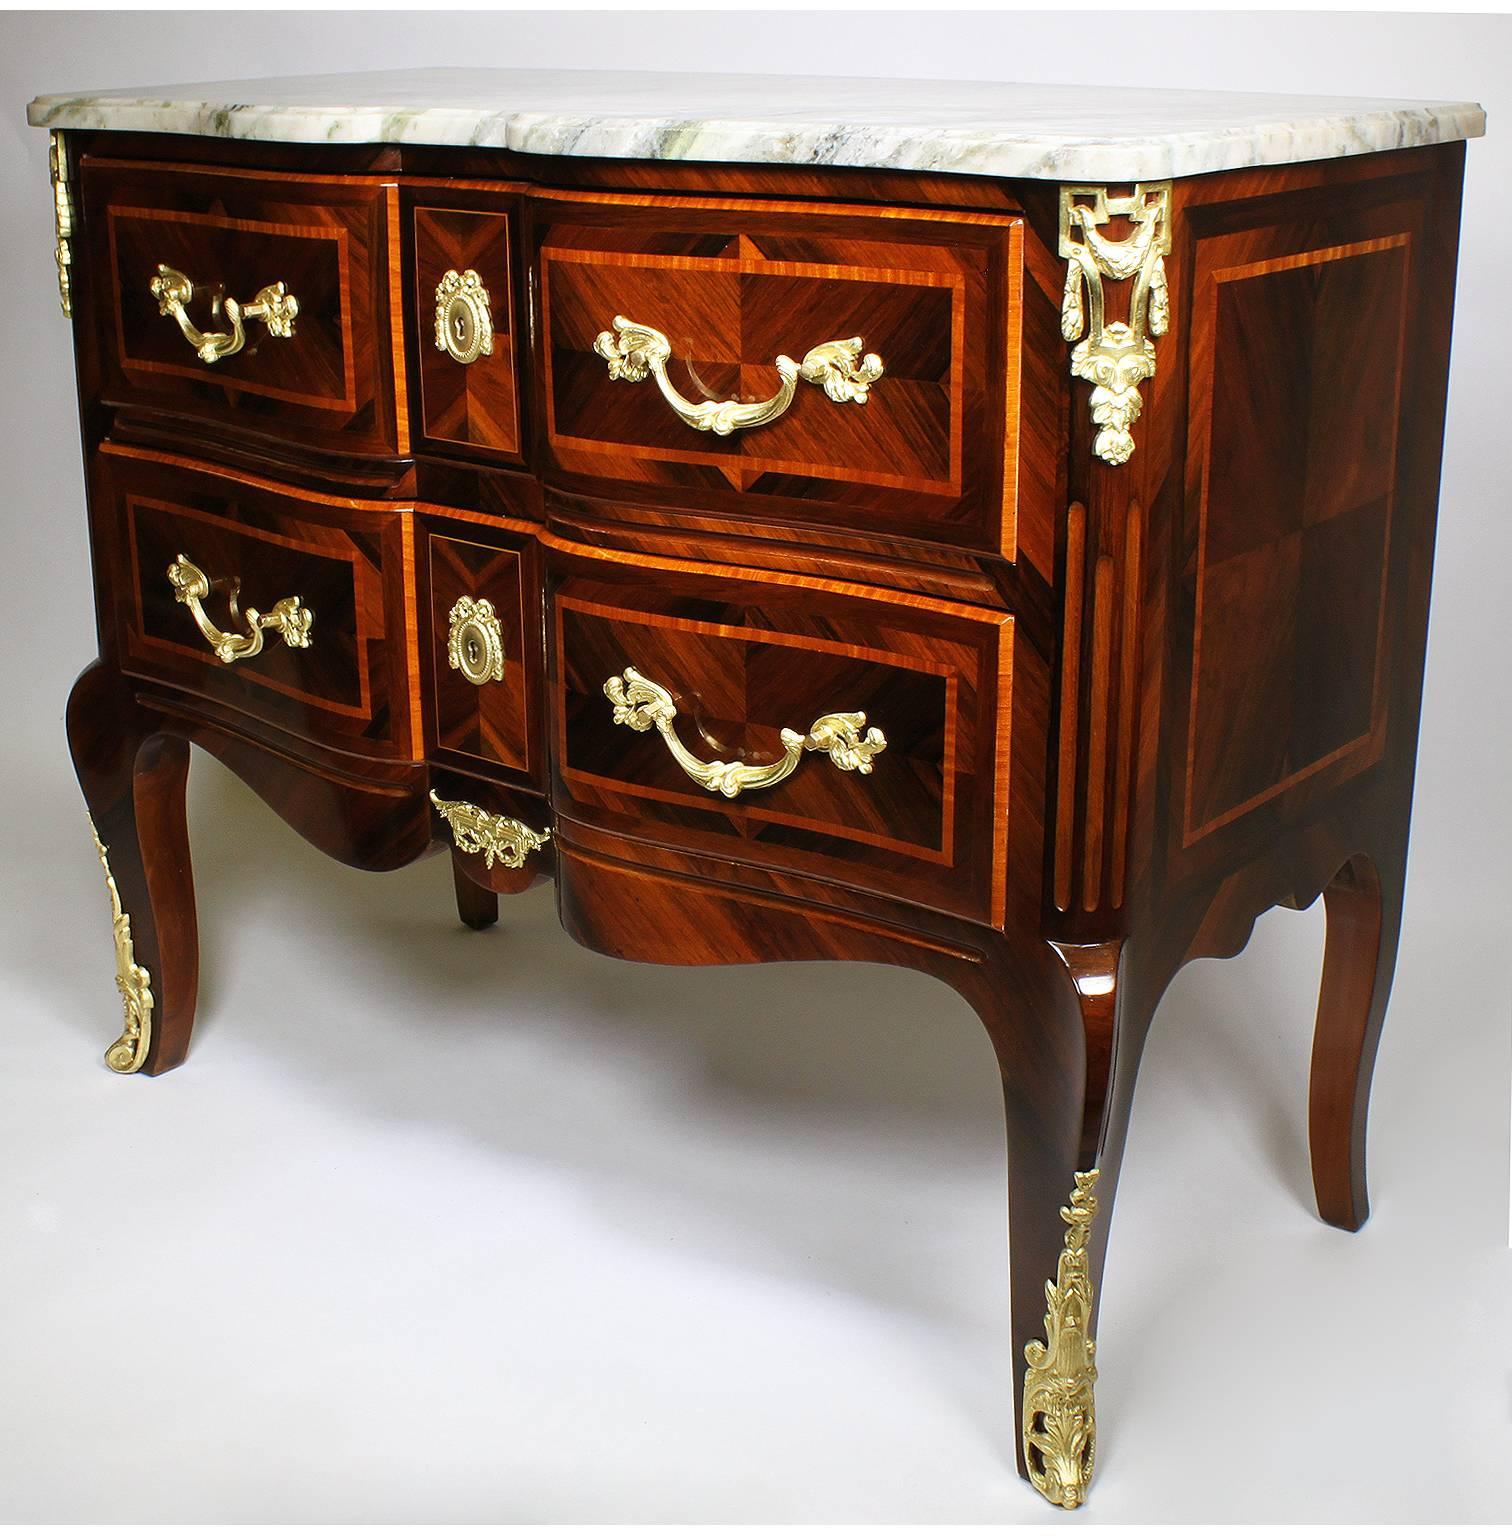 A fine French 19th century Regency transition style kingwood and tulipwood parquetry and ormolu-mounted two-drawer commode with marble top, Paris, circa 1890.

Measures: Height 34 1/4 inches (87 cm)
Depth 20 3/8 inches (51.8 cm)
Length 40 5/8 inches